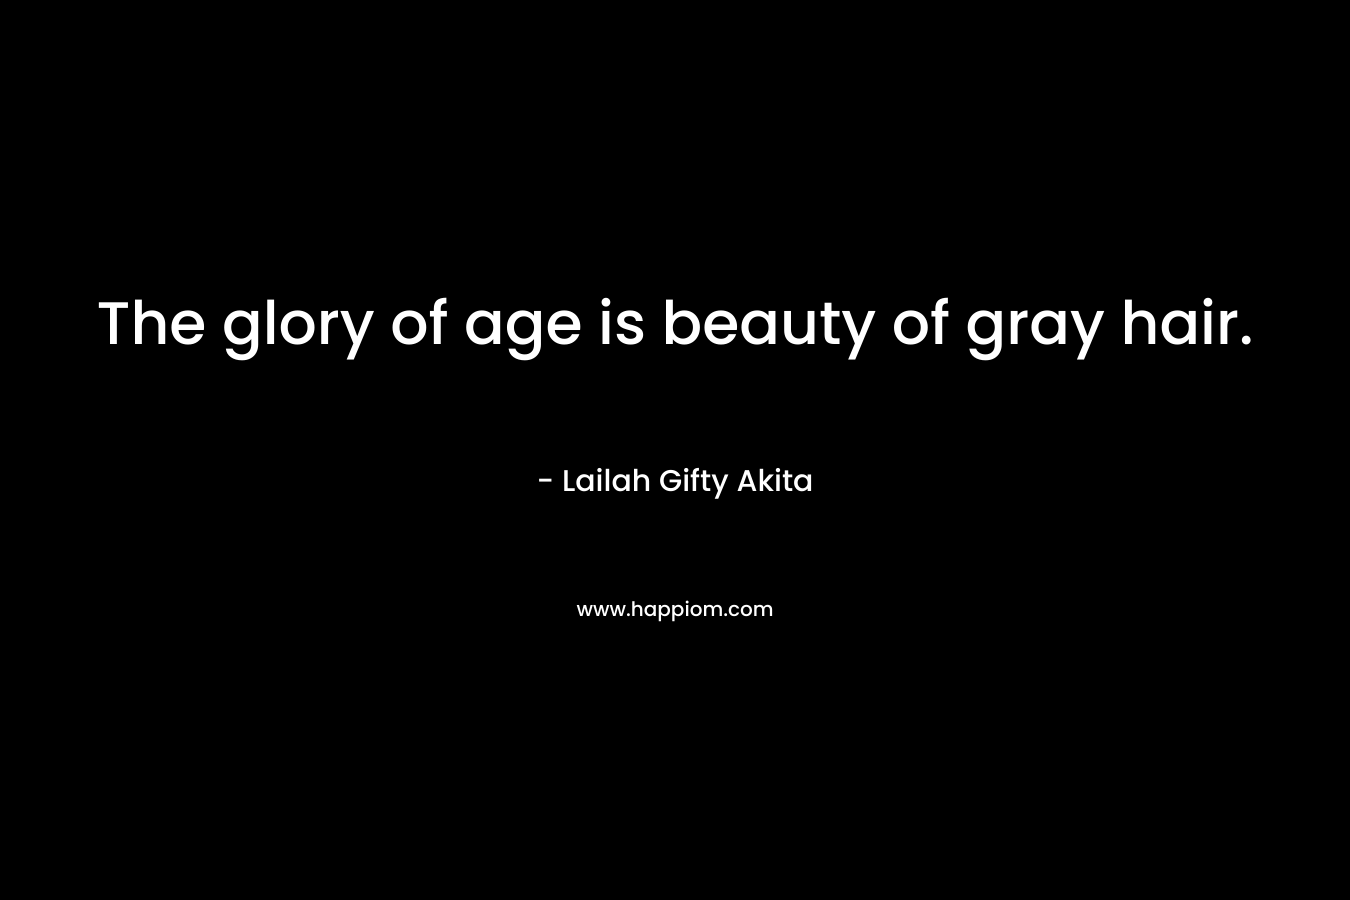 The glory of age is beauty of gray hair.